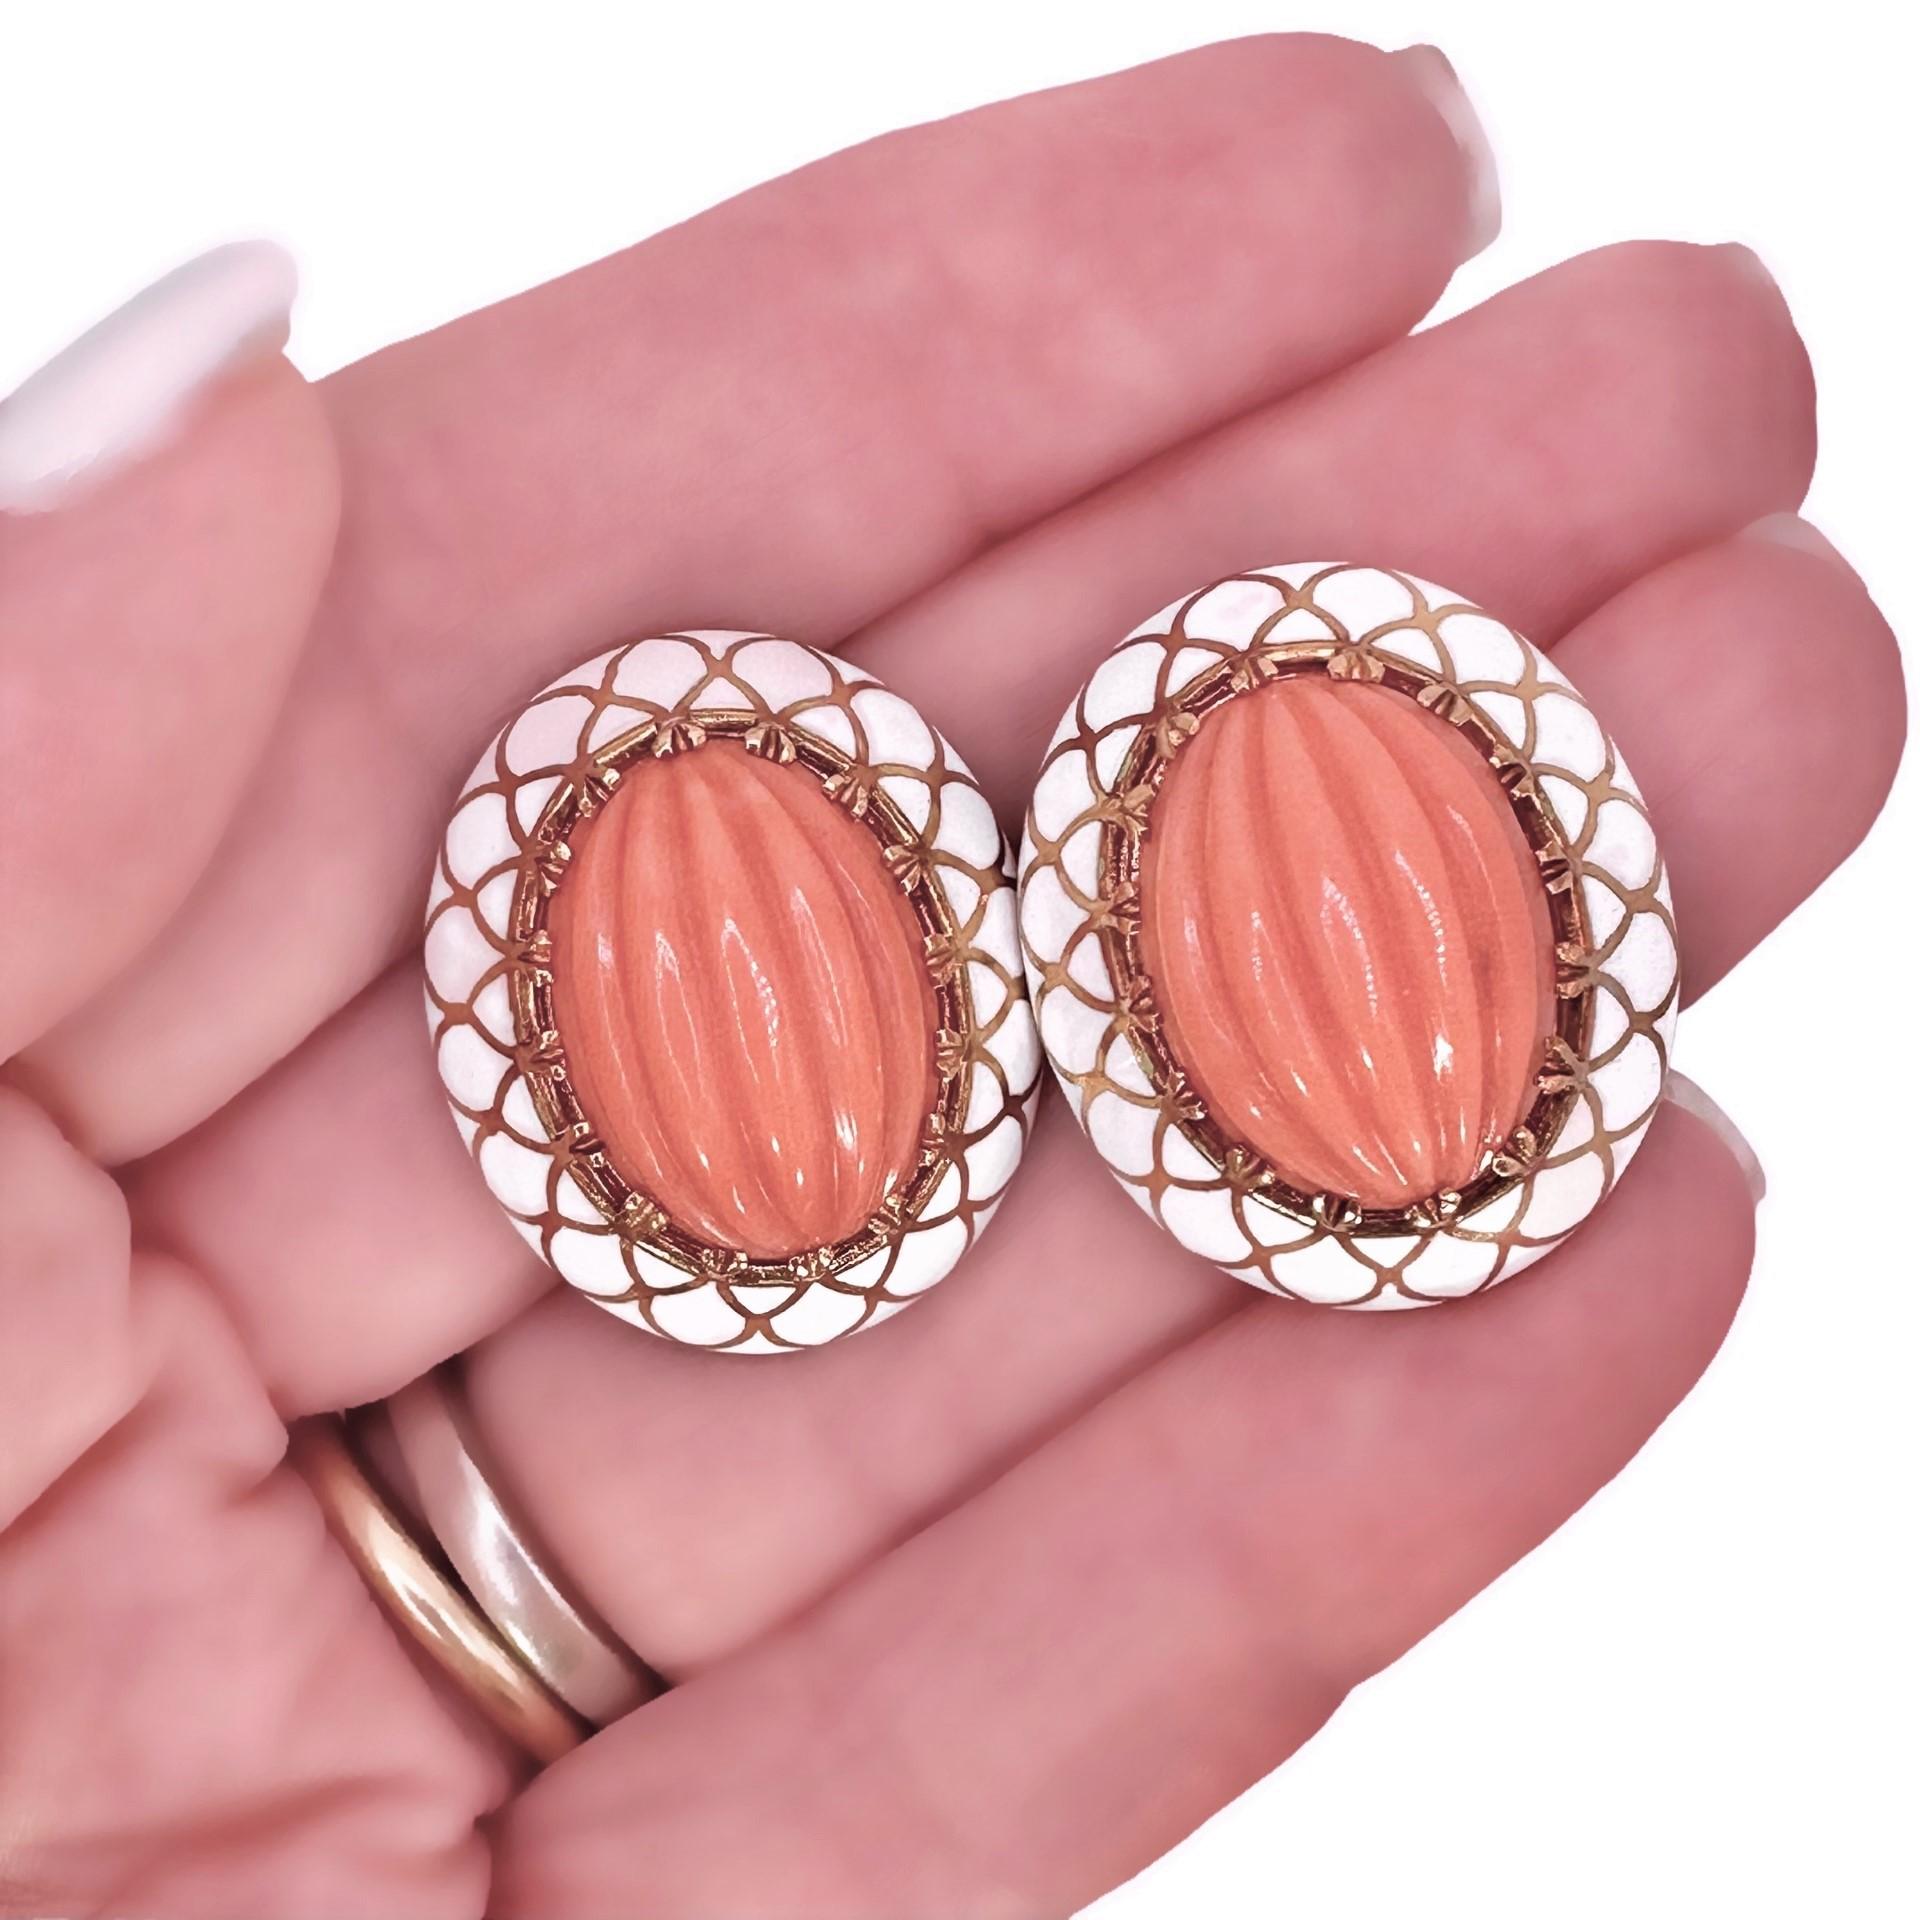 18k Yellow Gold, Salmon Color Coral and White Enamel Earrings - Great for Summer For Sale 2